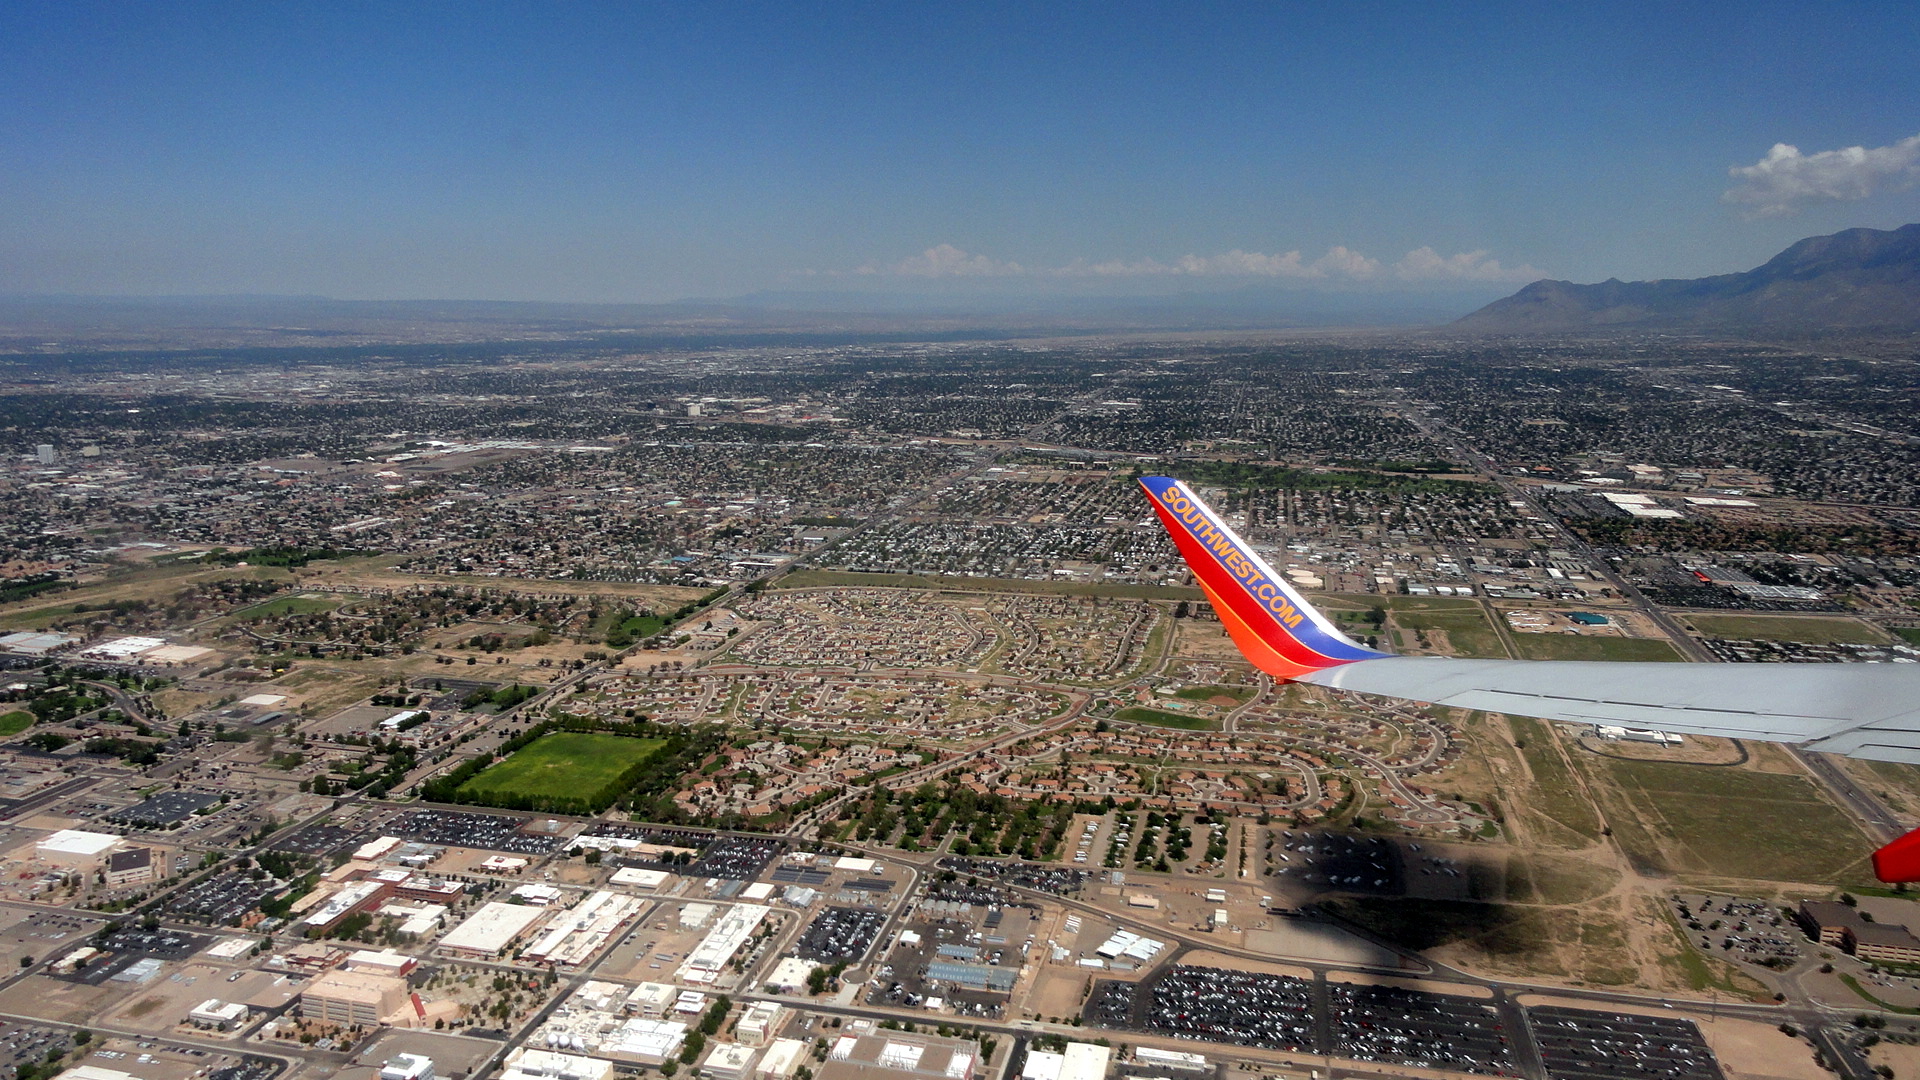 ABQ from the Air